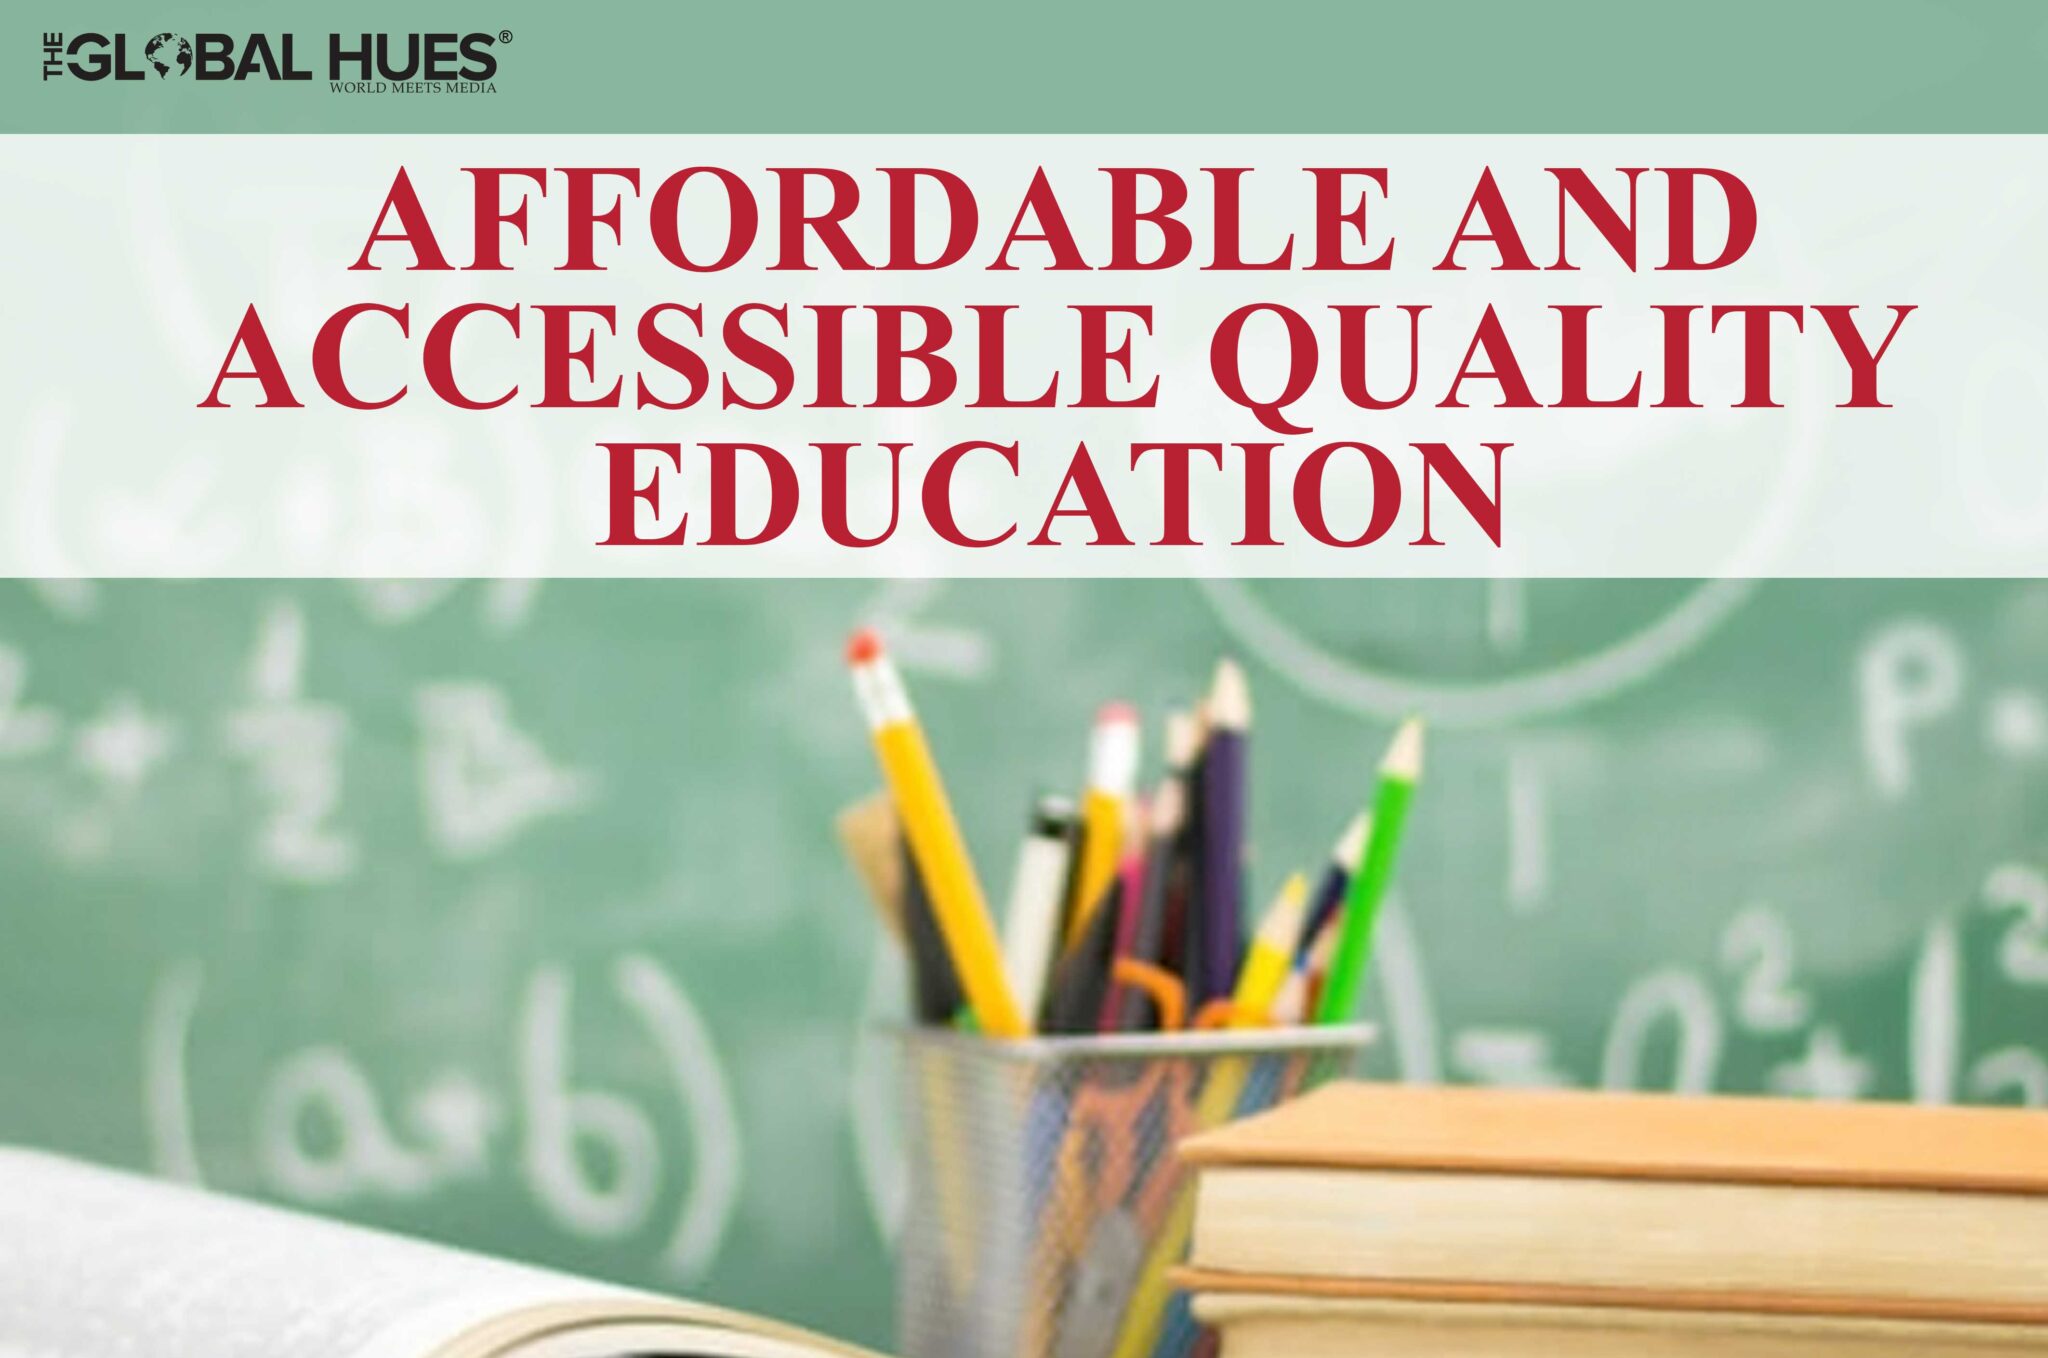 quality education journal articles